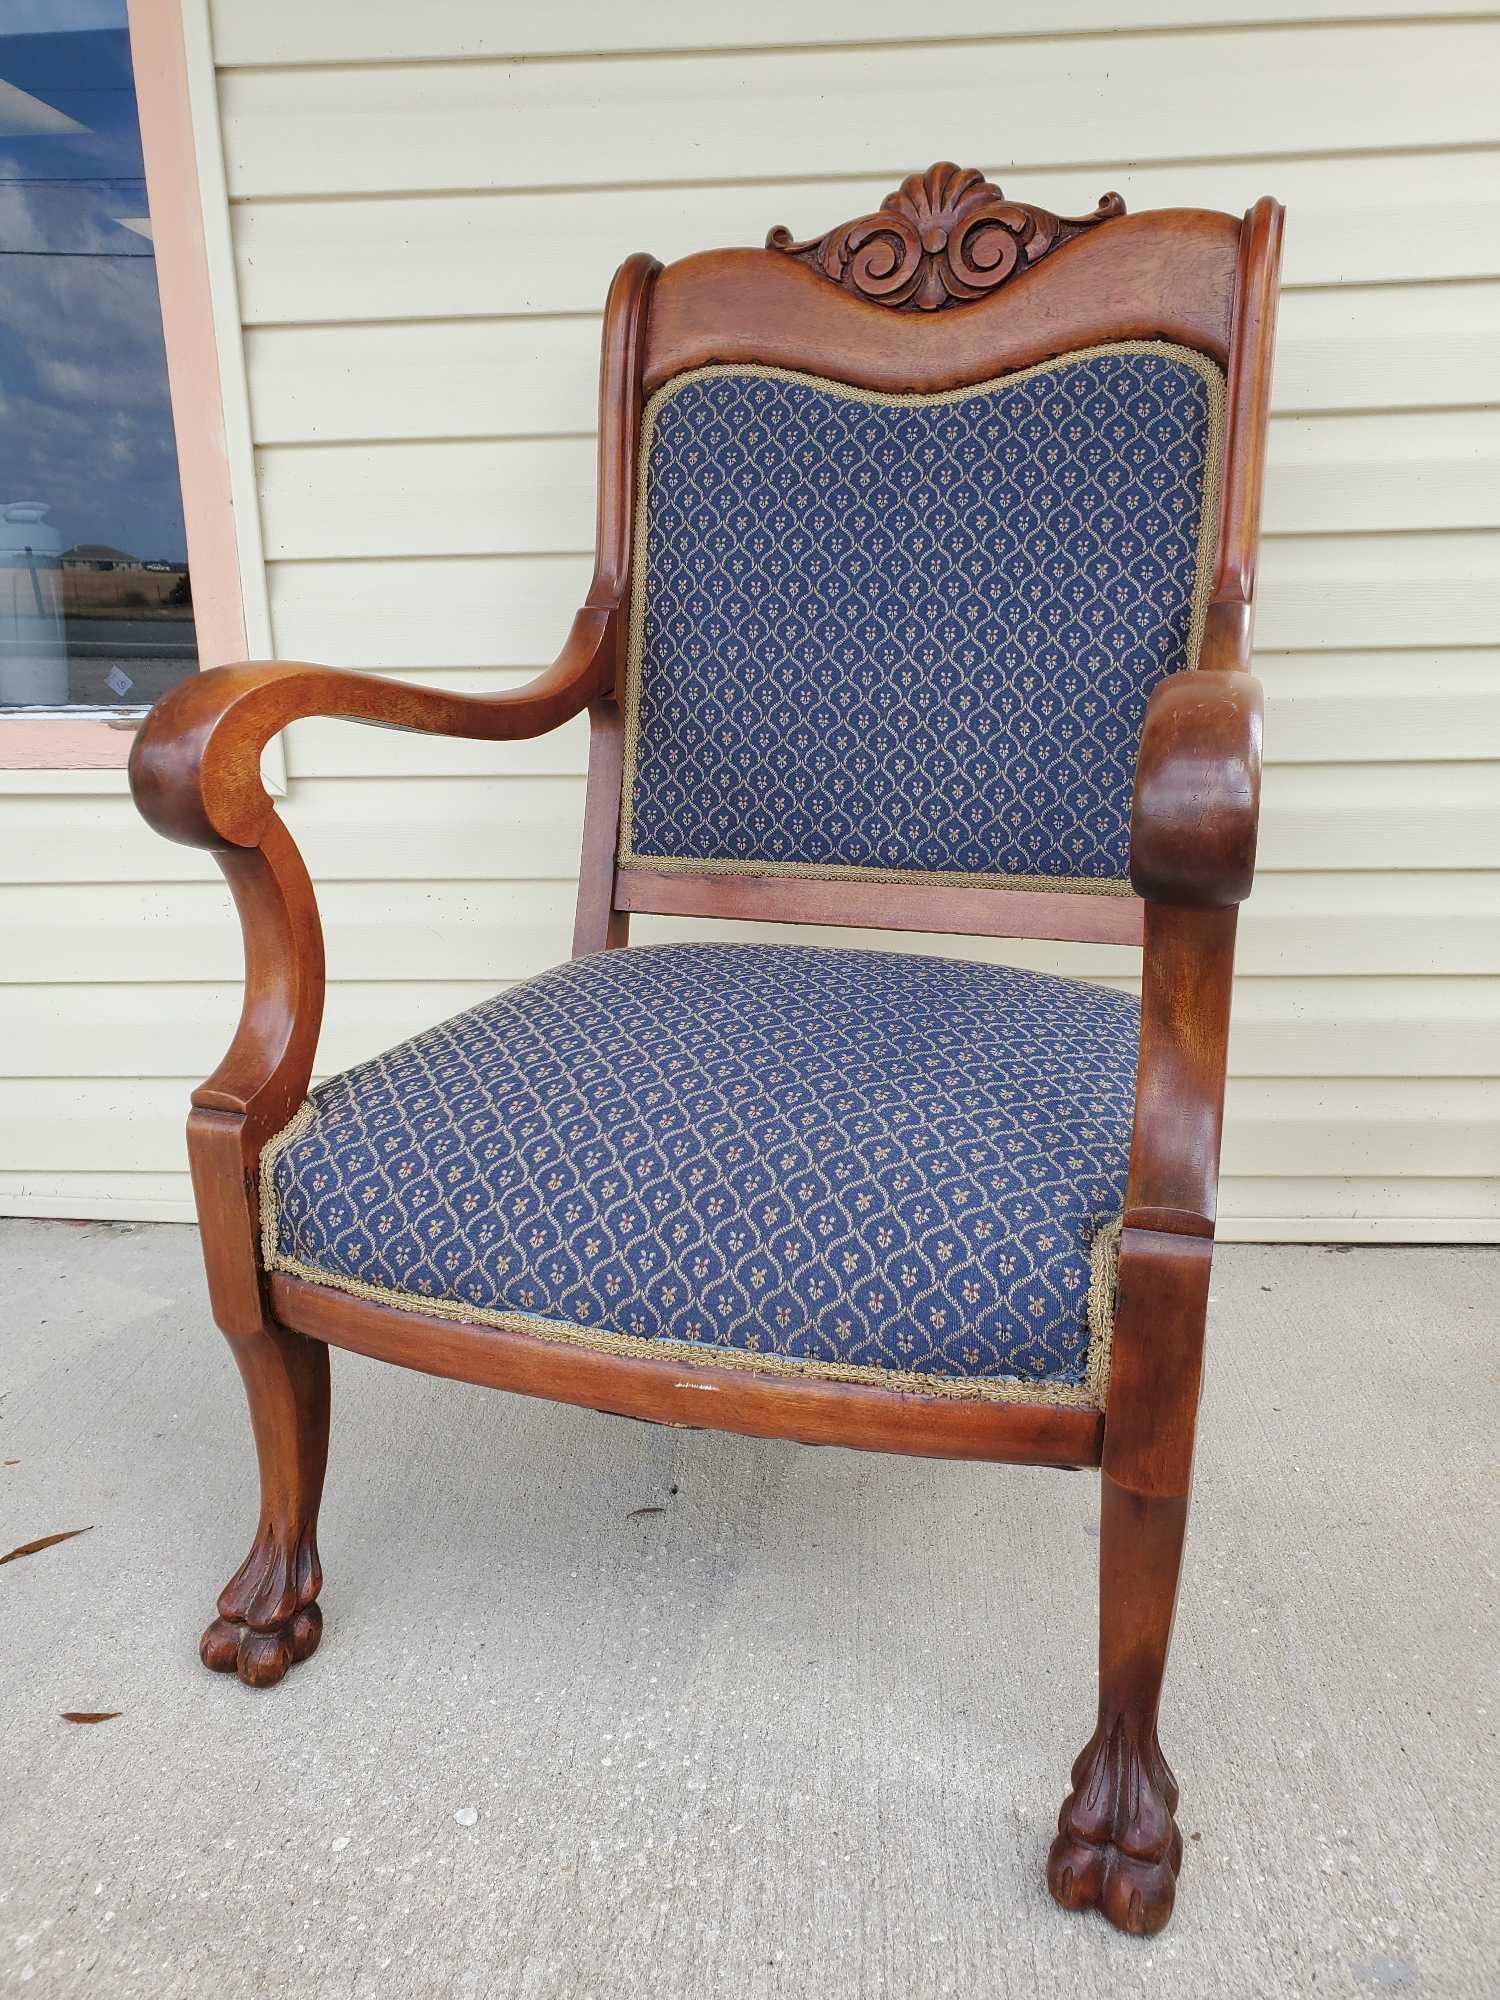 Beautiful Clawfoot Wooden, Upholstered Armchair